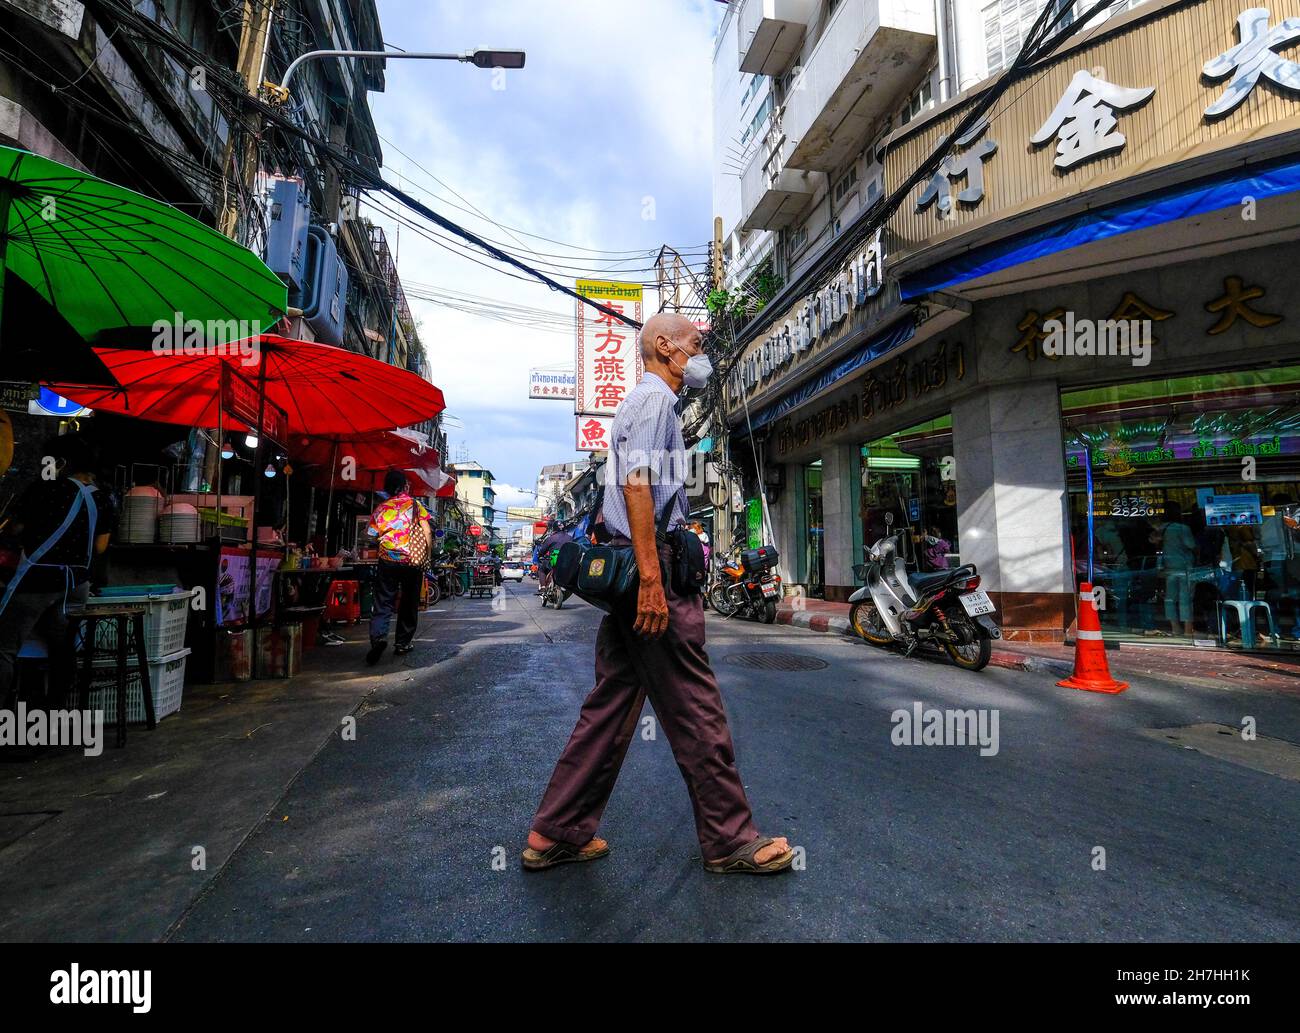 An elderly man crosses the road in Chinatown, Bangkok, Thailand. Stock Photo